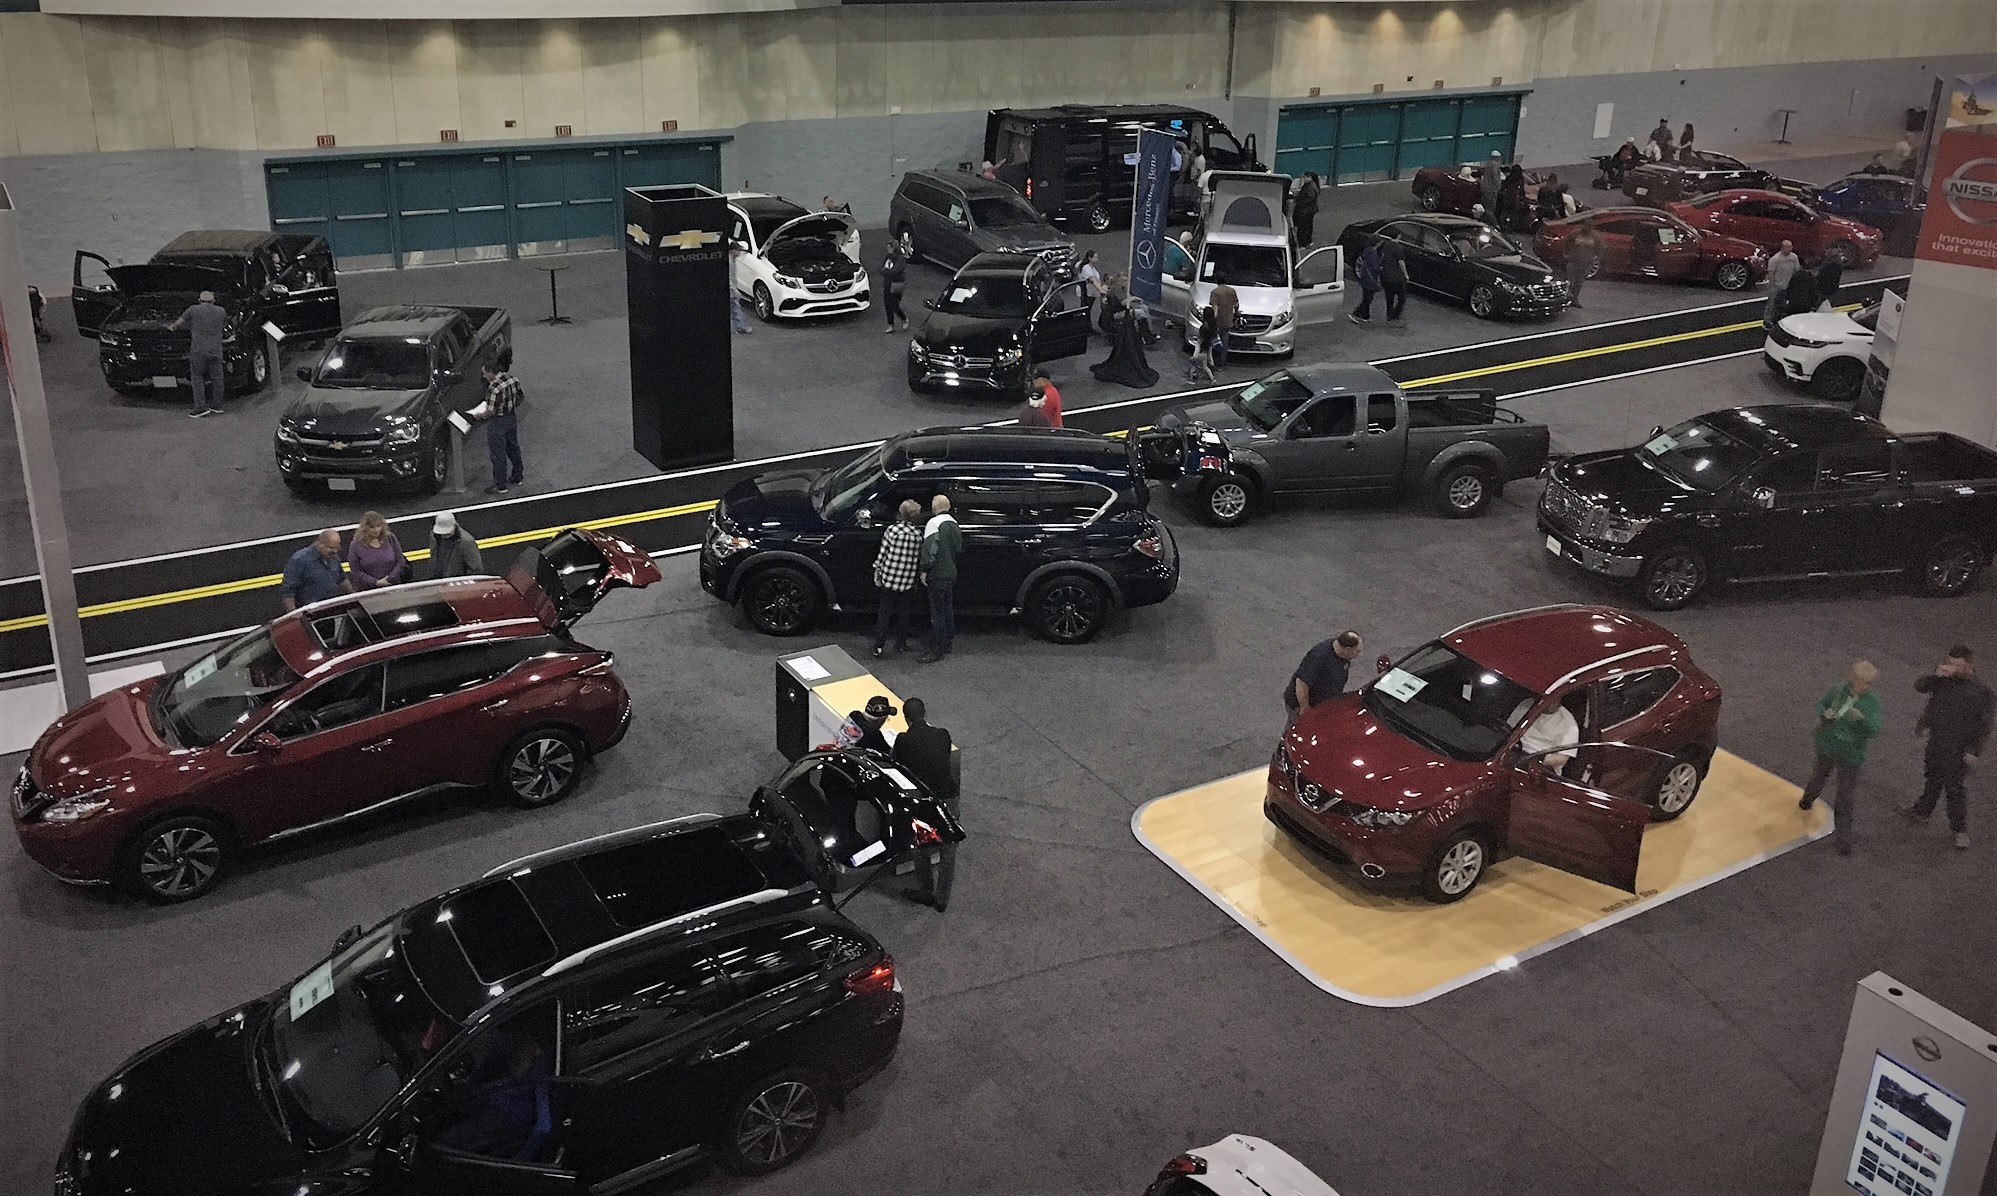 Free Auto Show Featuring New Cars Runs Through Sunday FresYes!